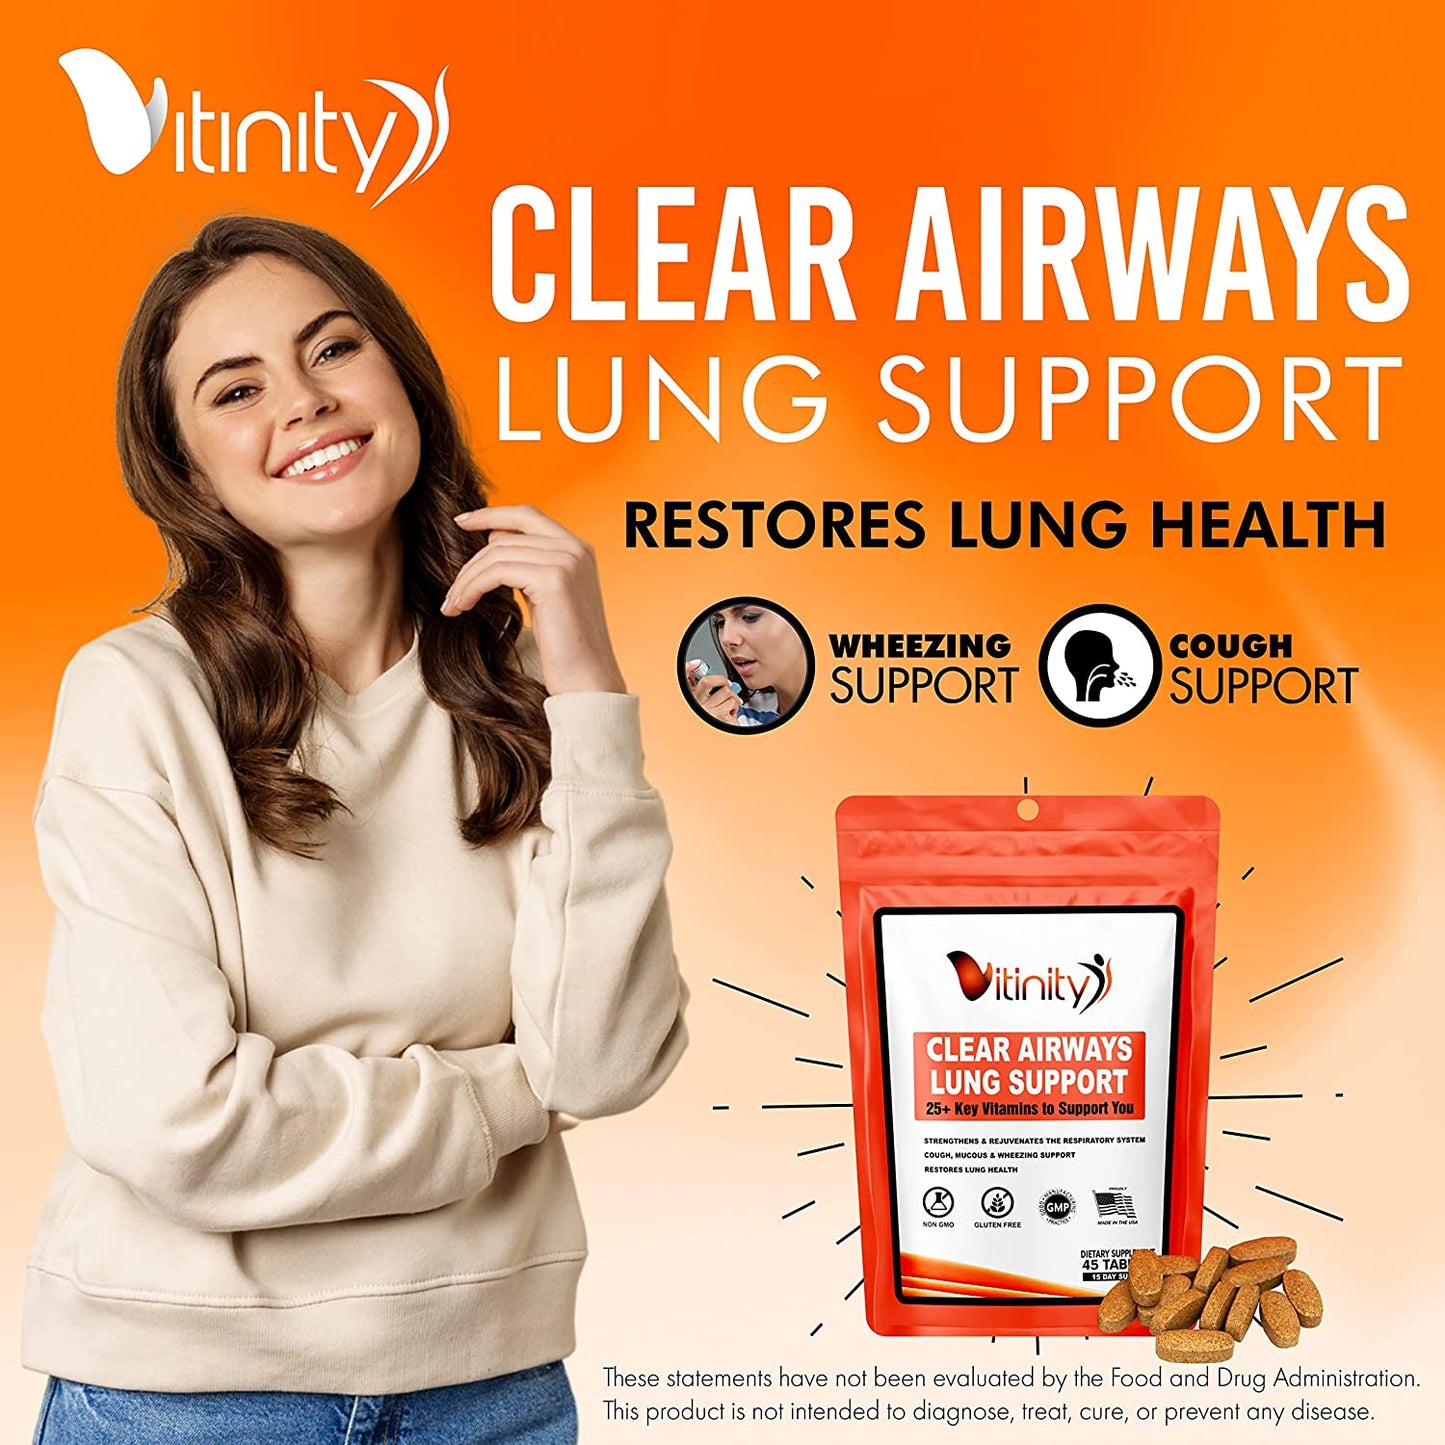 Lung Cleanse & Respiratory Support Supplement-Natural Lung Health Complex-Lung Detox for Those with Breathing, Asthma, Seasonal Allergy (30 Day)